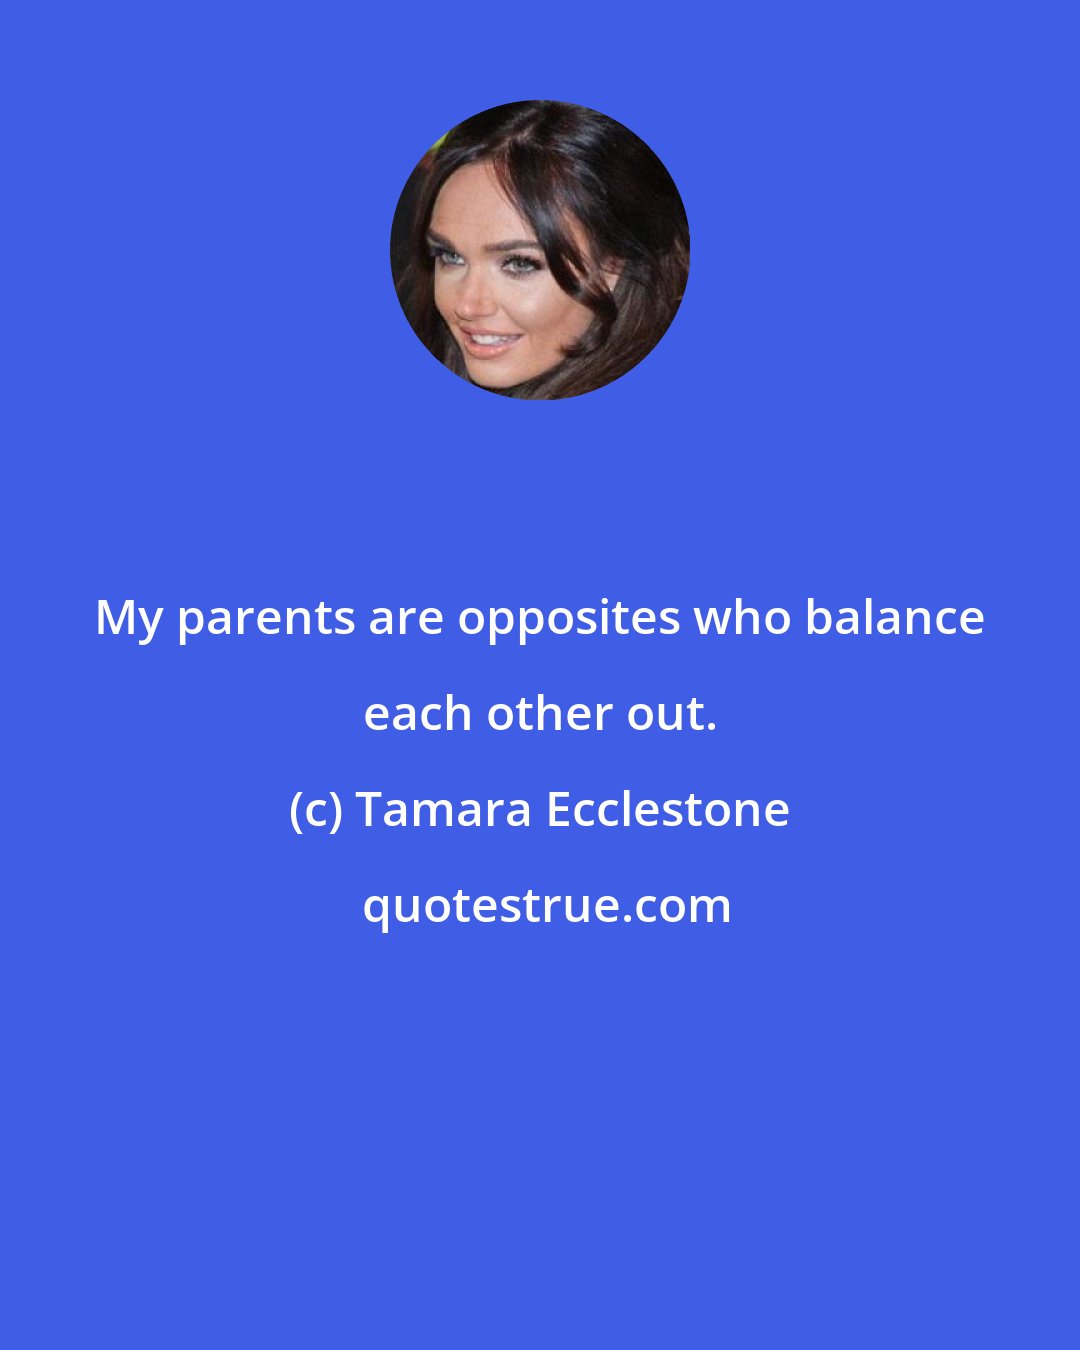 Tamara Ecclestone: My parents are opposites who balance each other out.